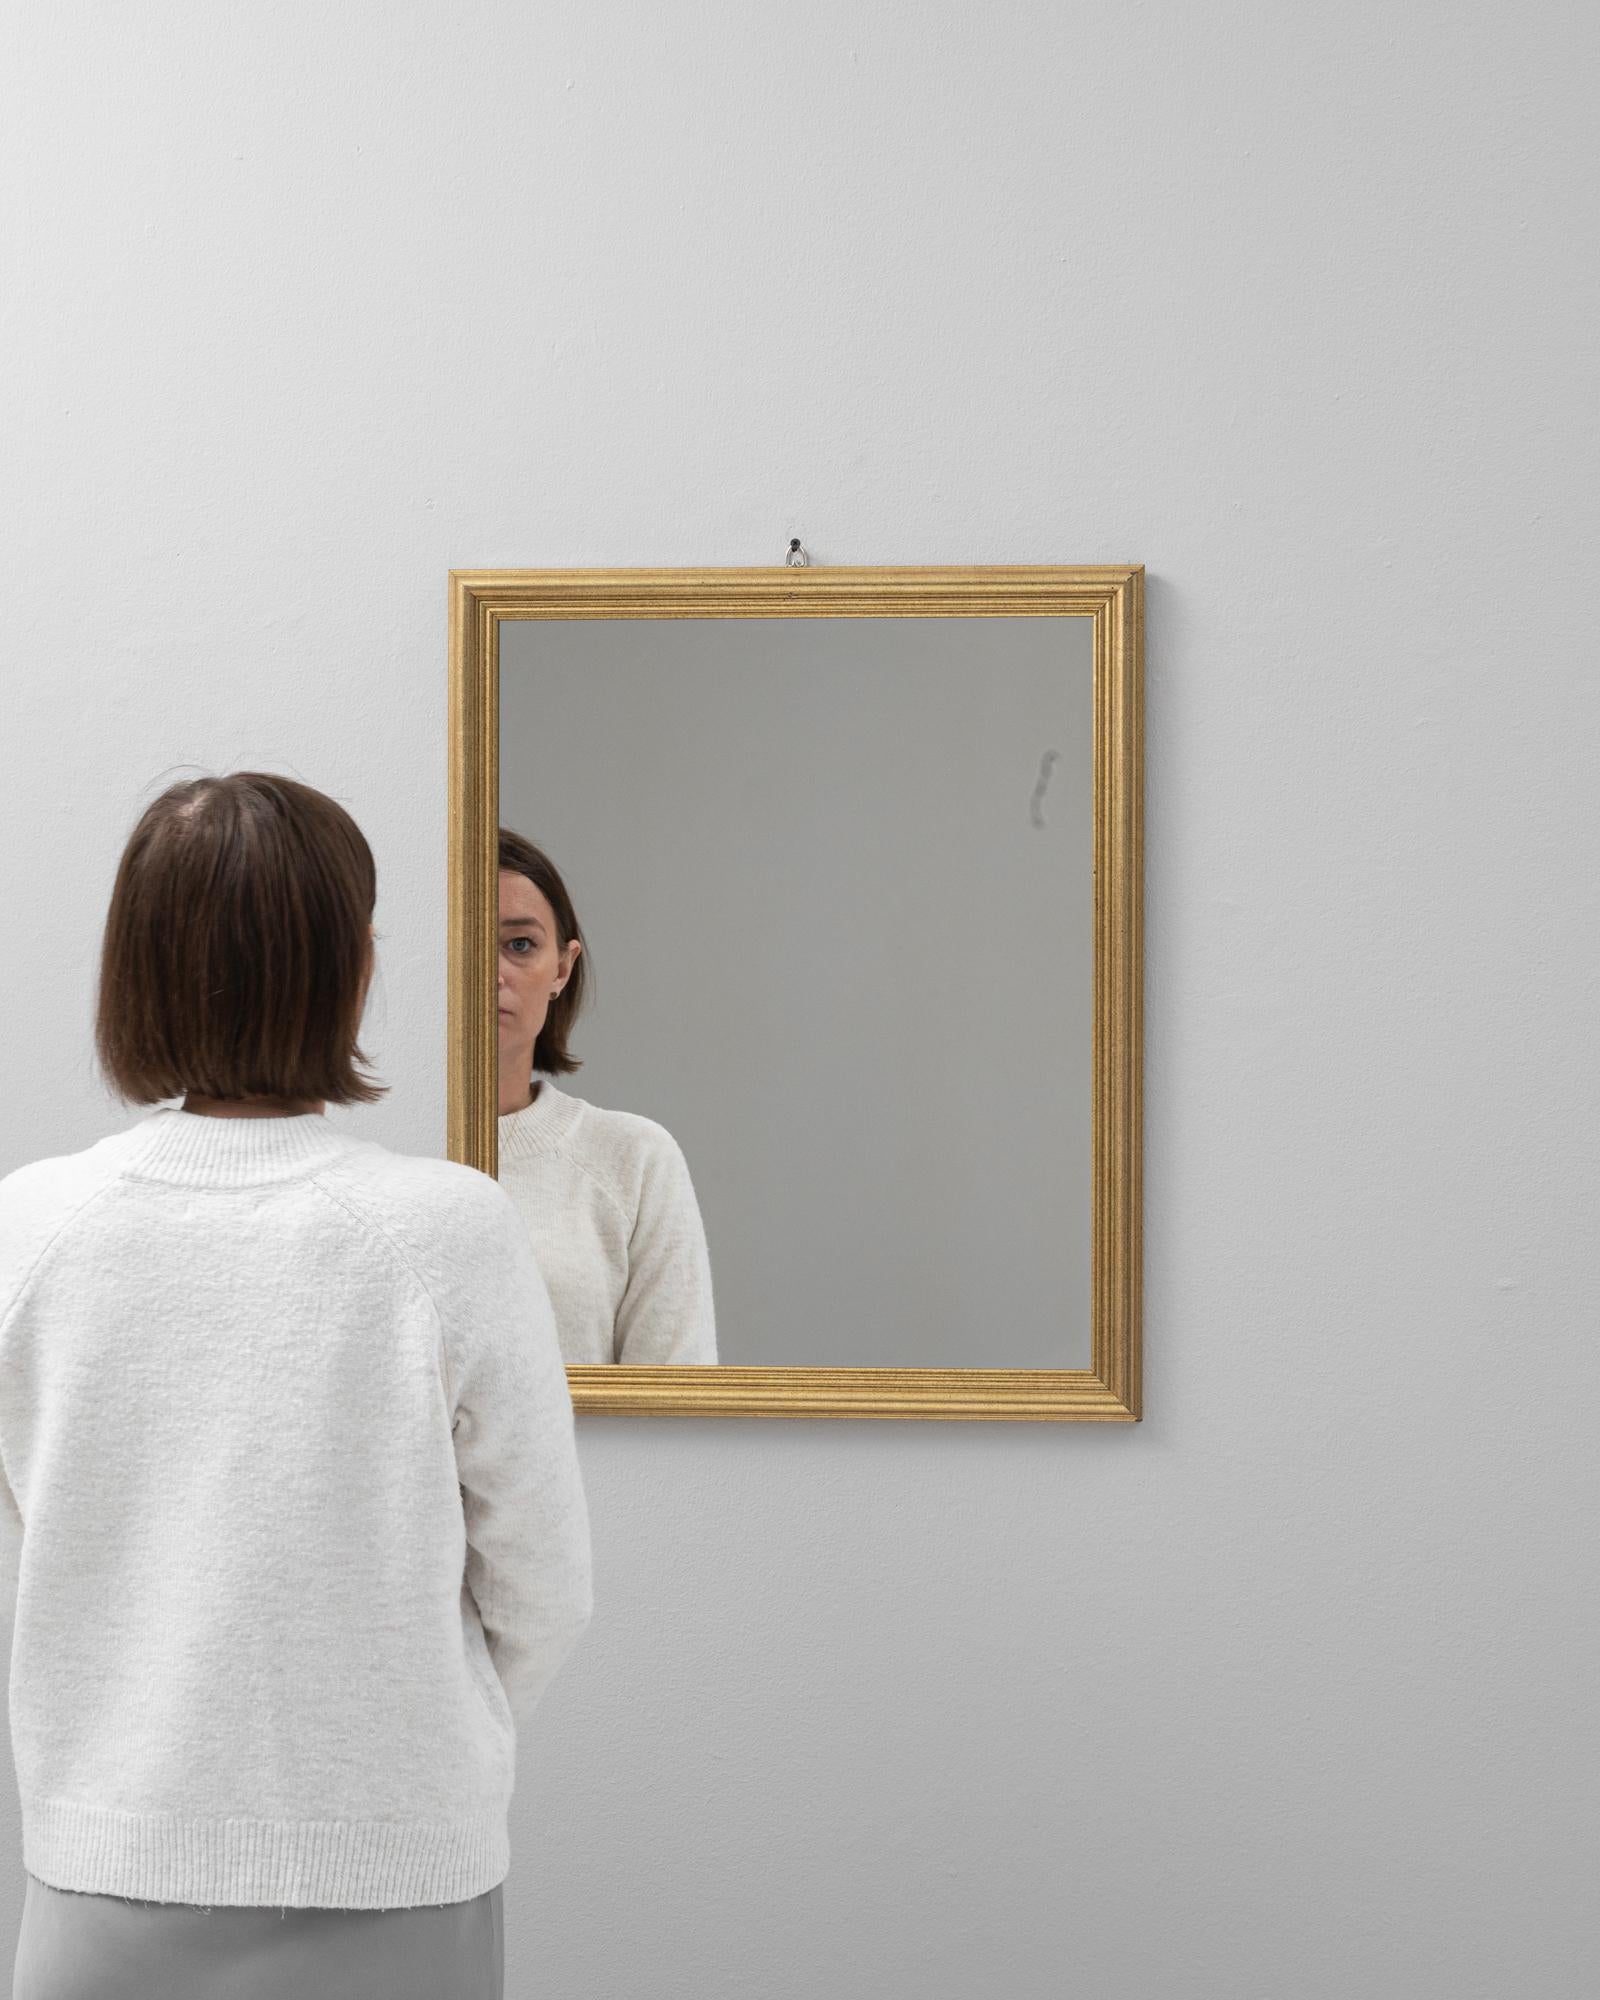 This 20th Century French gilded wood mirror presents a seamless blend of simplicity and splendor, ideal for bringing a touch of understated luxury to any space. The mirror's clean lines and classic square shape are accentuated by the subtle shimmer